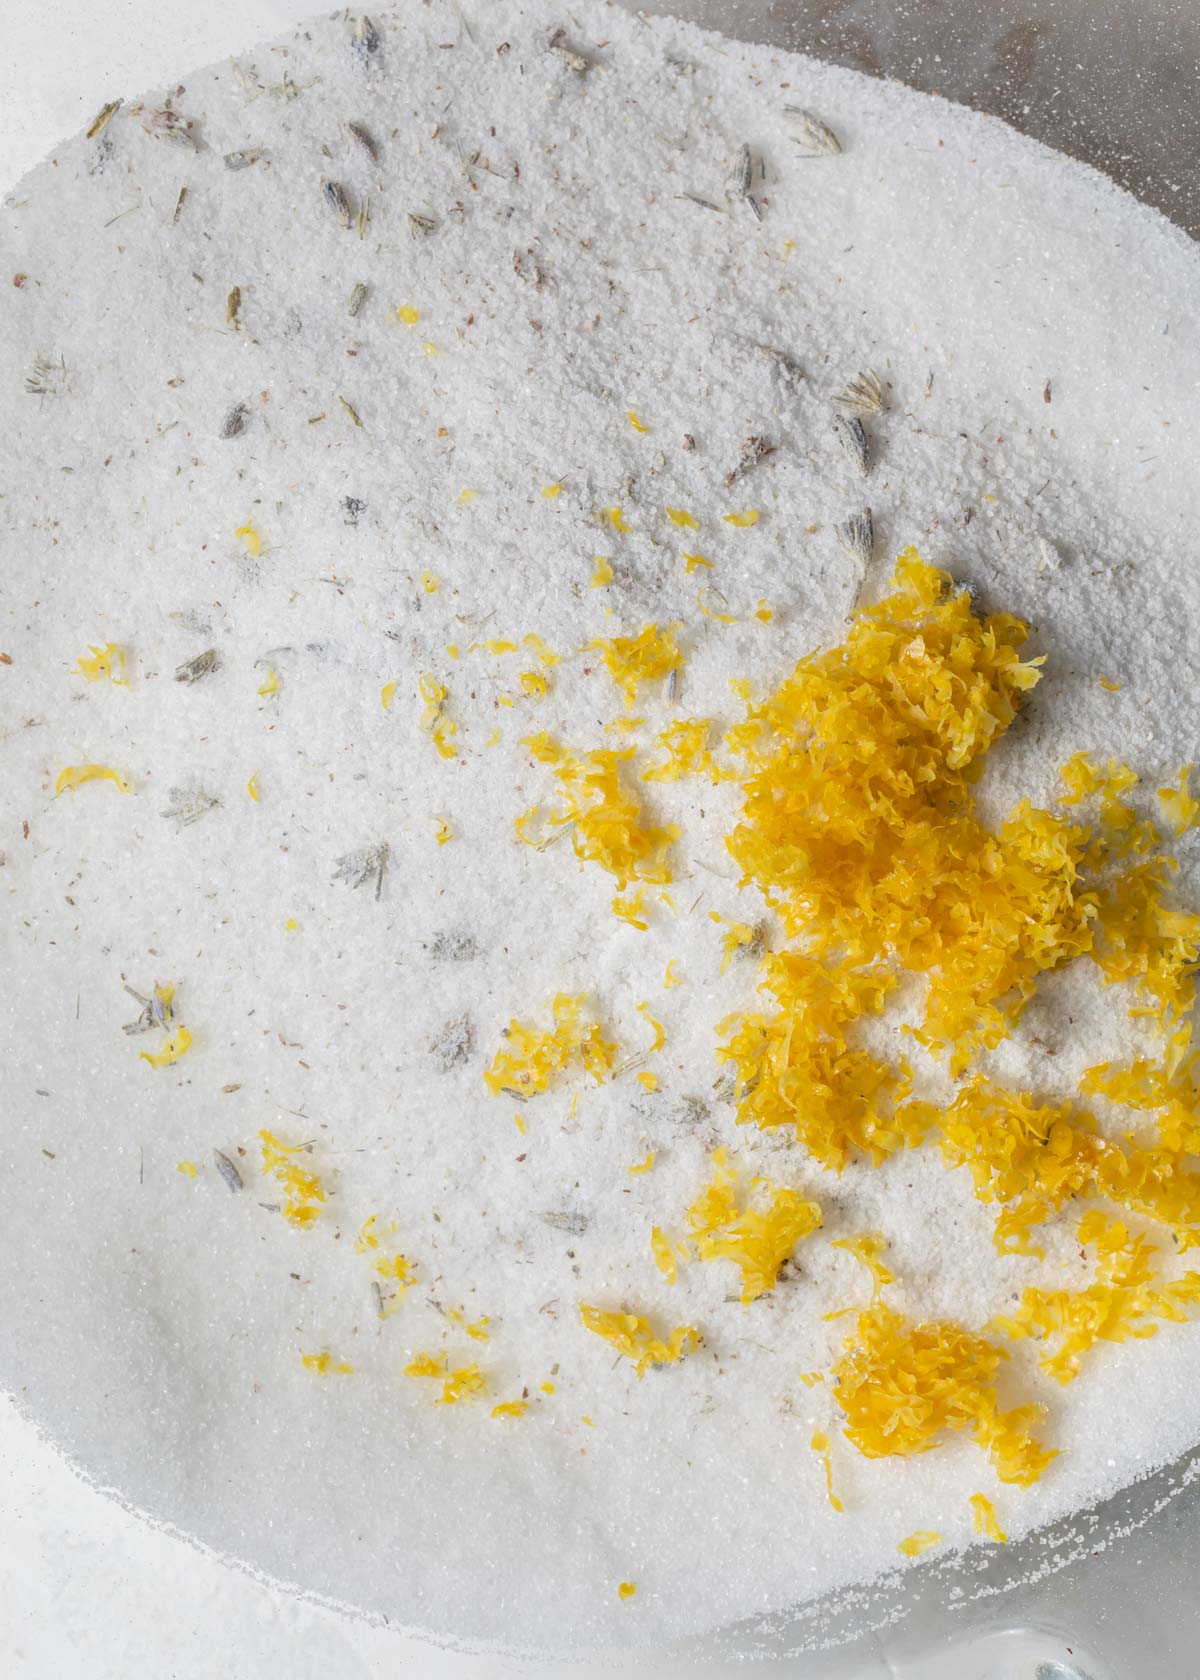 Lavender and lemon zest combined with sugar